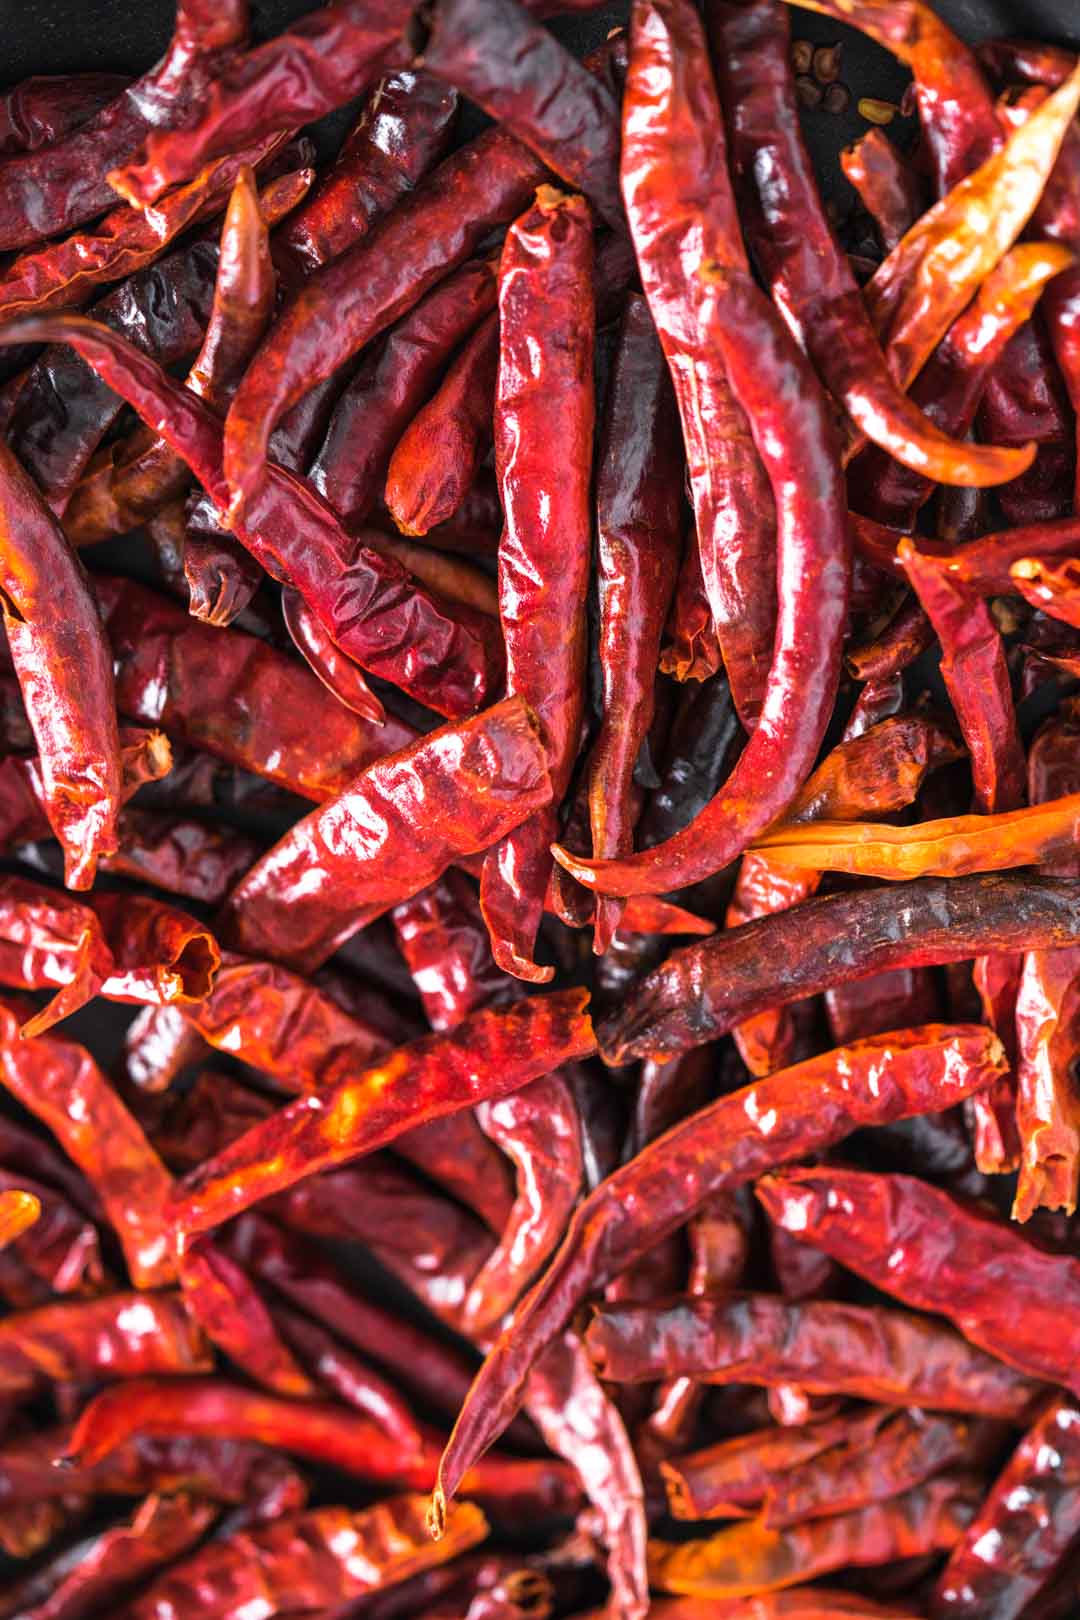 Bird's Eye Chili: What It Is & How To Cook It